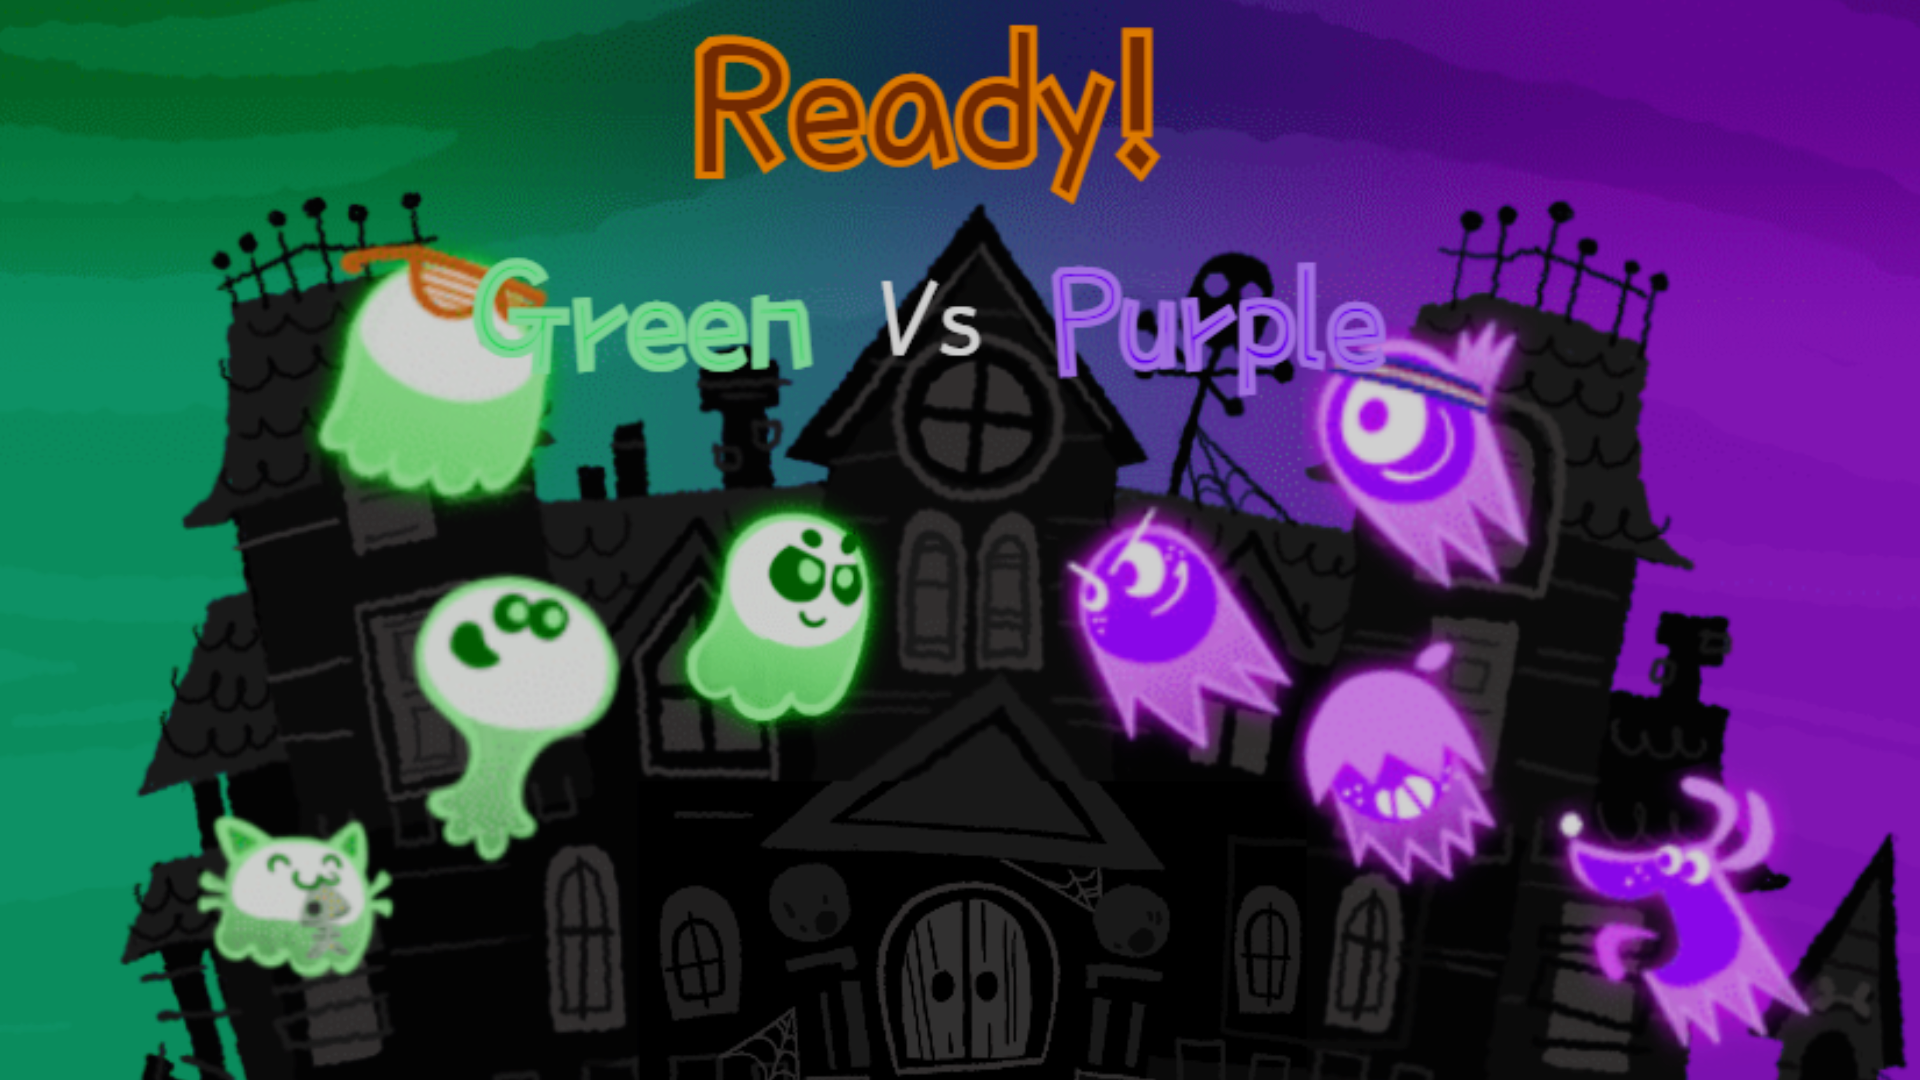 Google’s Halloween doodle is an adorable ghostly duel game